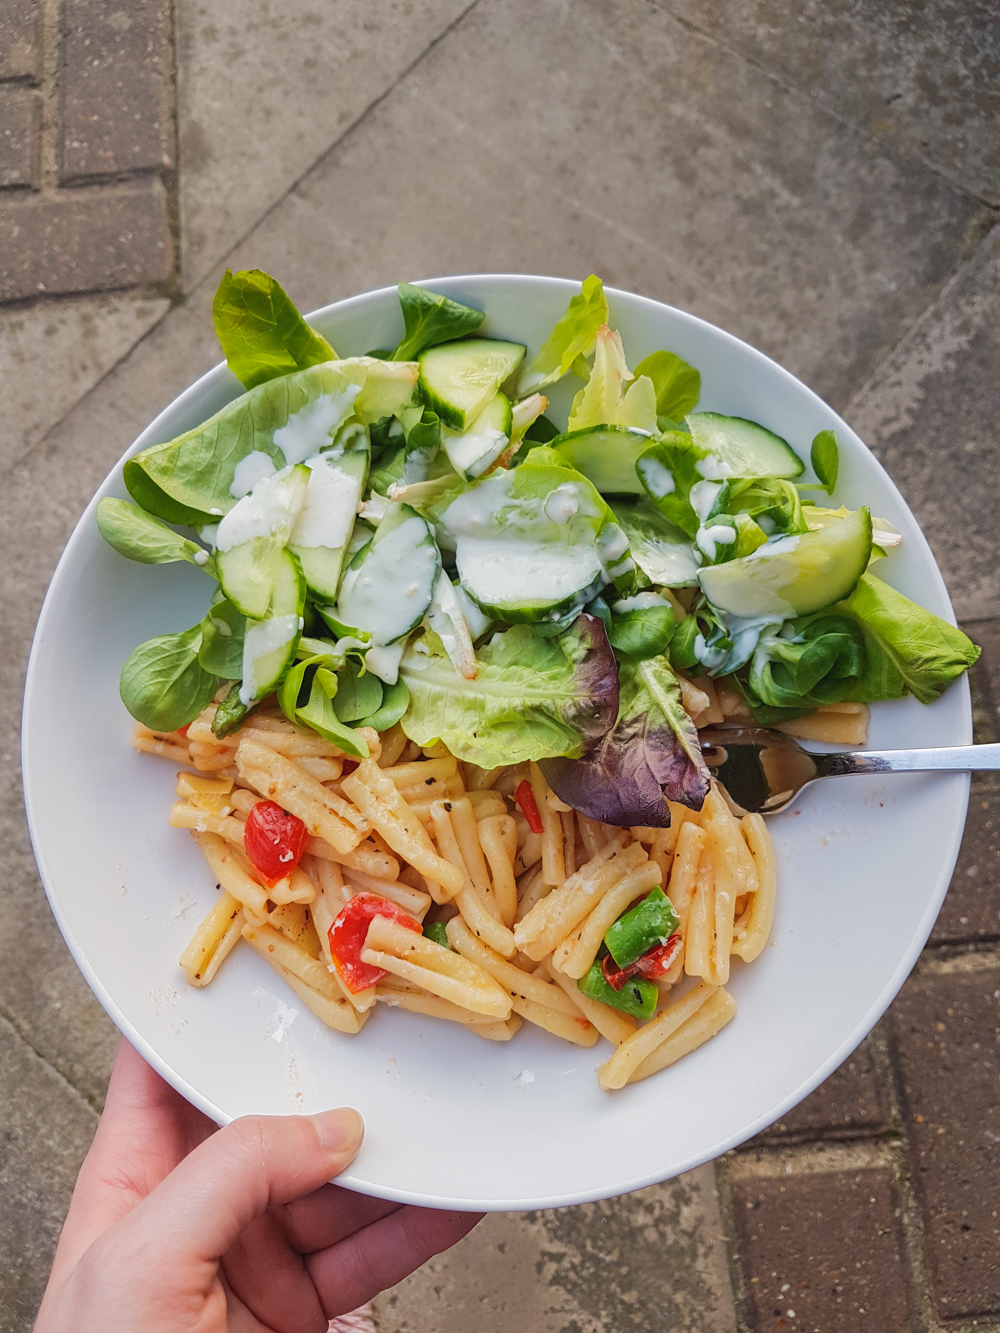 Tomato, Garlic and Asparagus Pasta with Salad